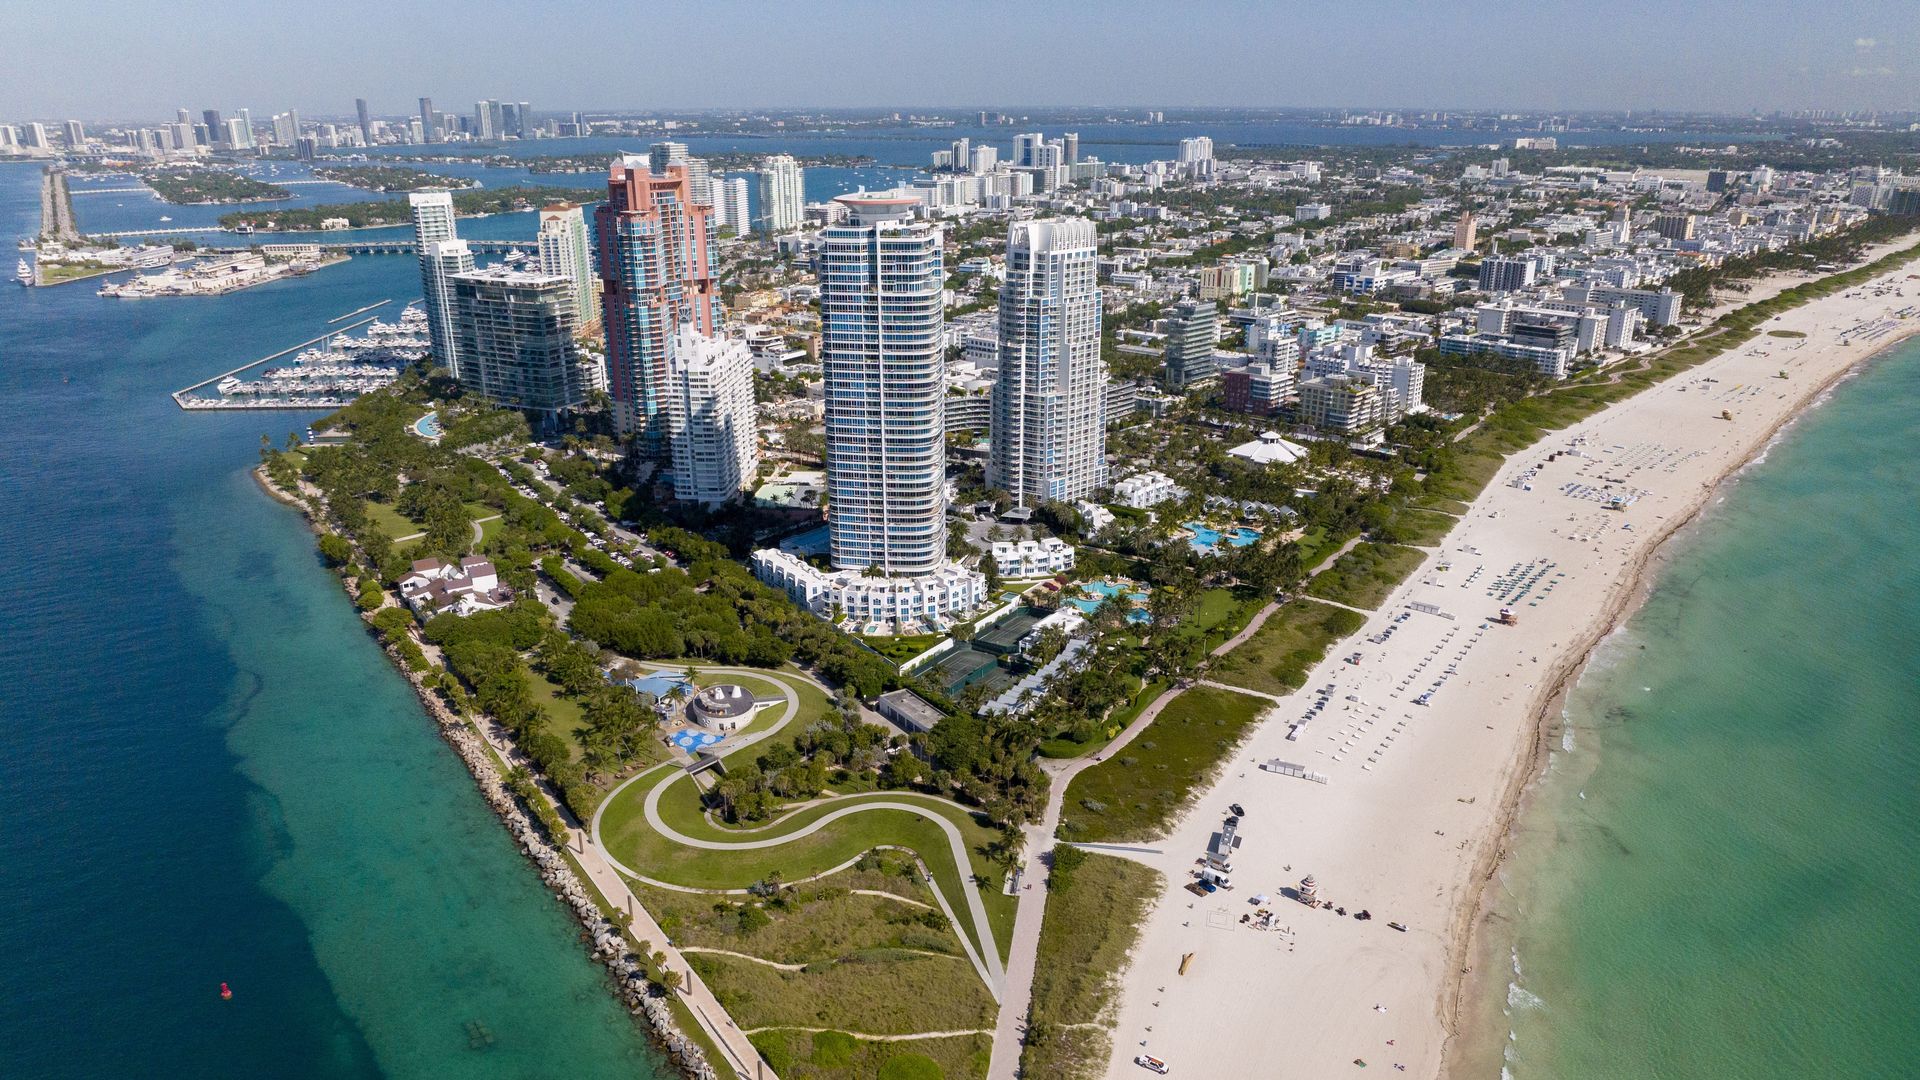 An aerial view of condominiums towering over a beachfront park